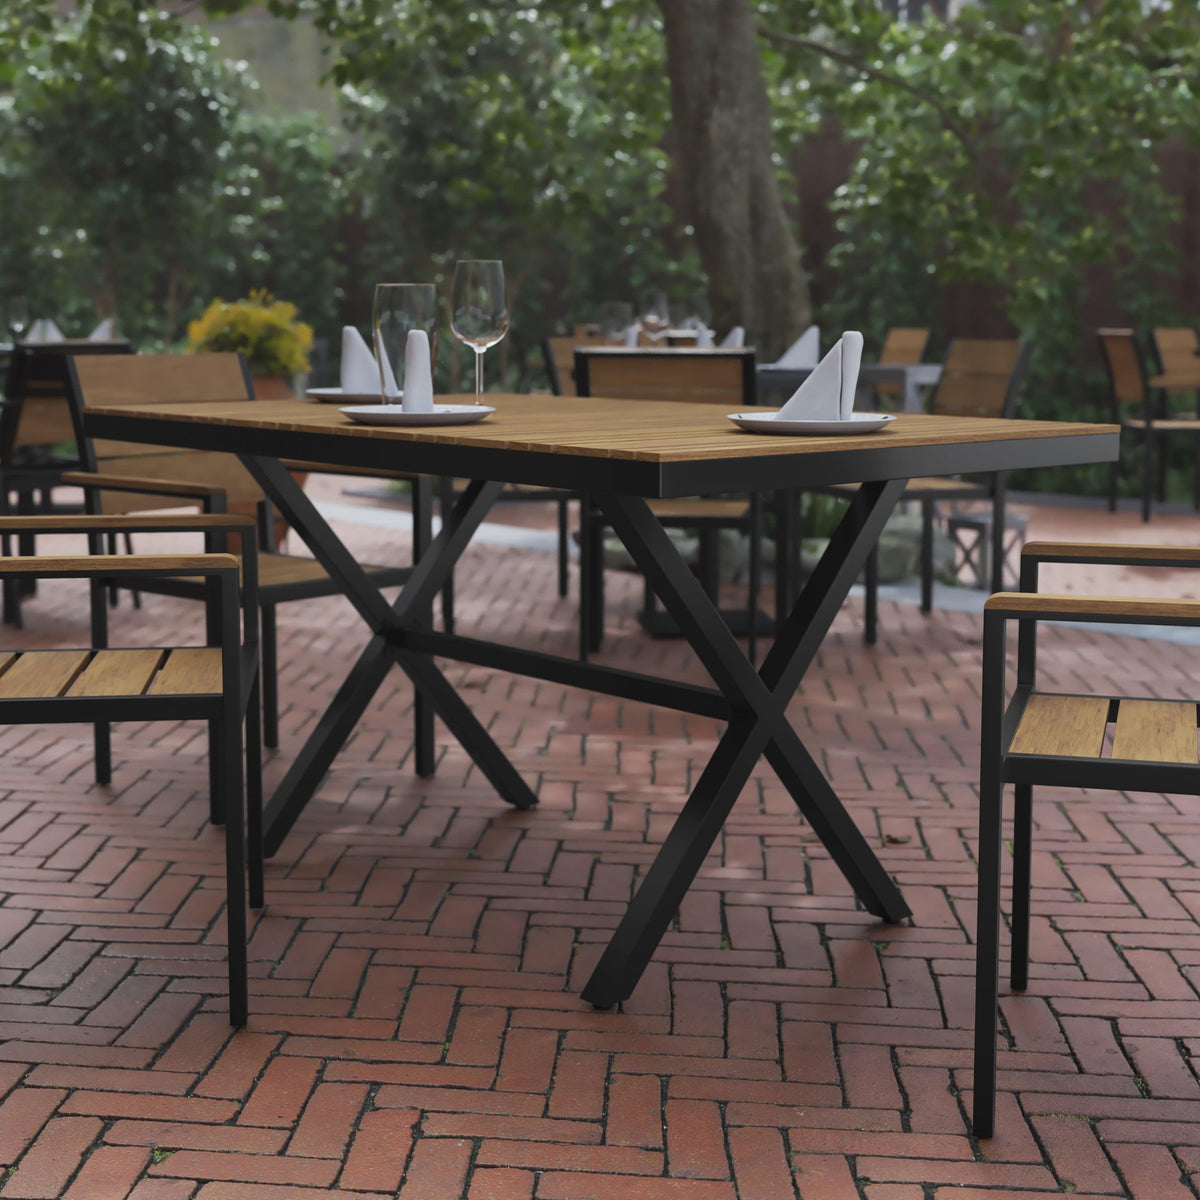 Natural |#| Commercial 59 x 35.5 Cross Frame Faux Teak Outdoor Patio Table - Natural/Gray